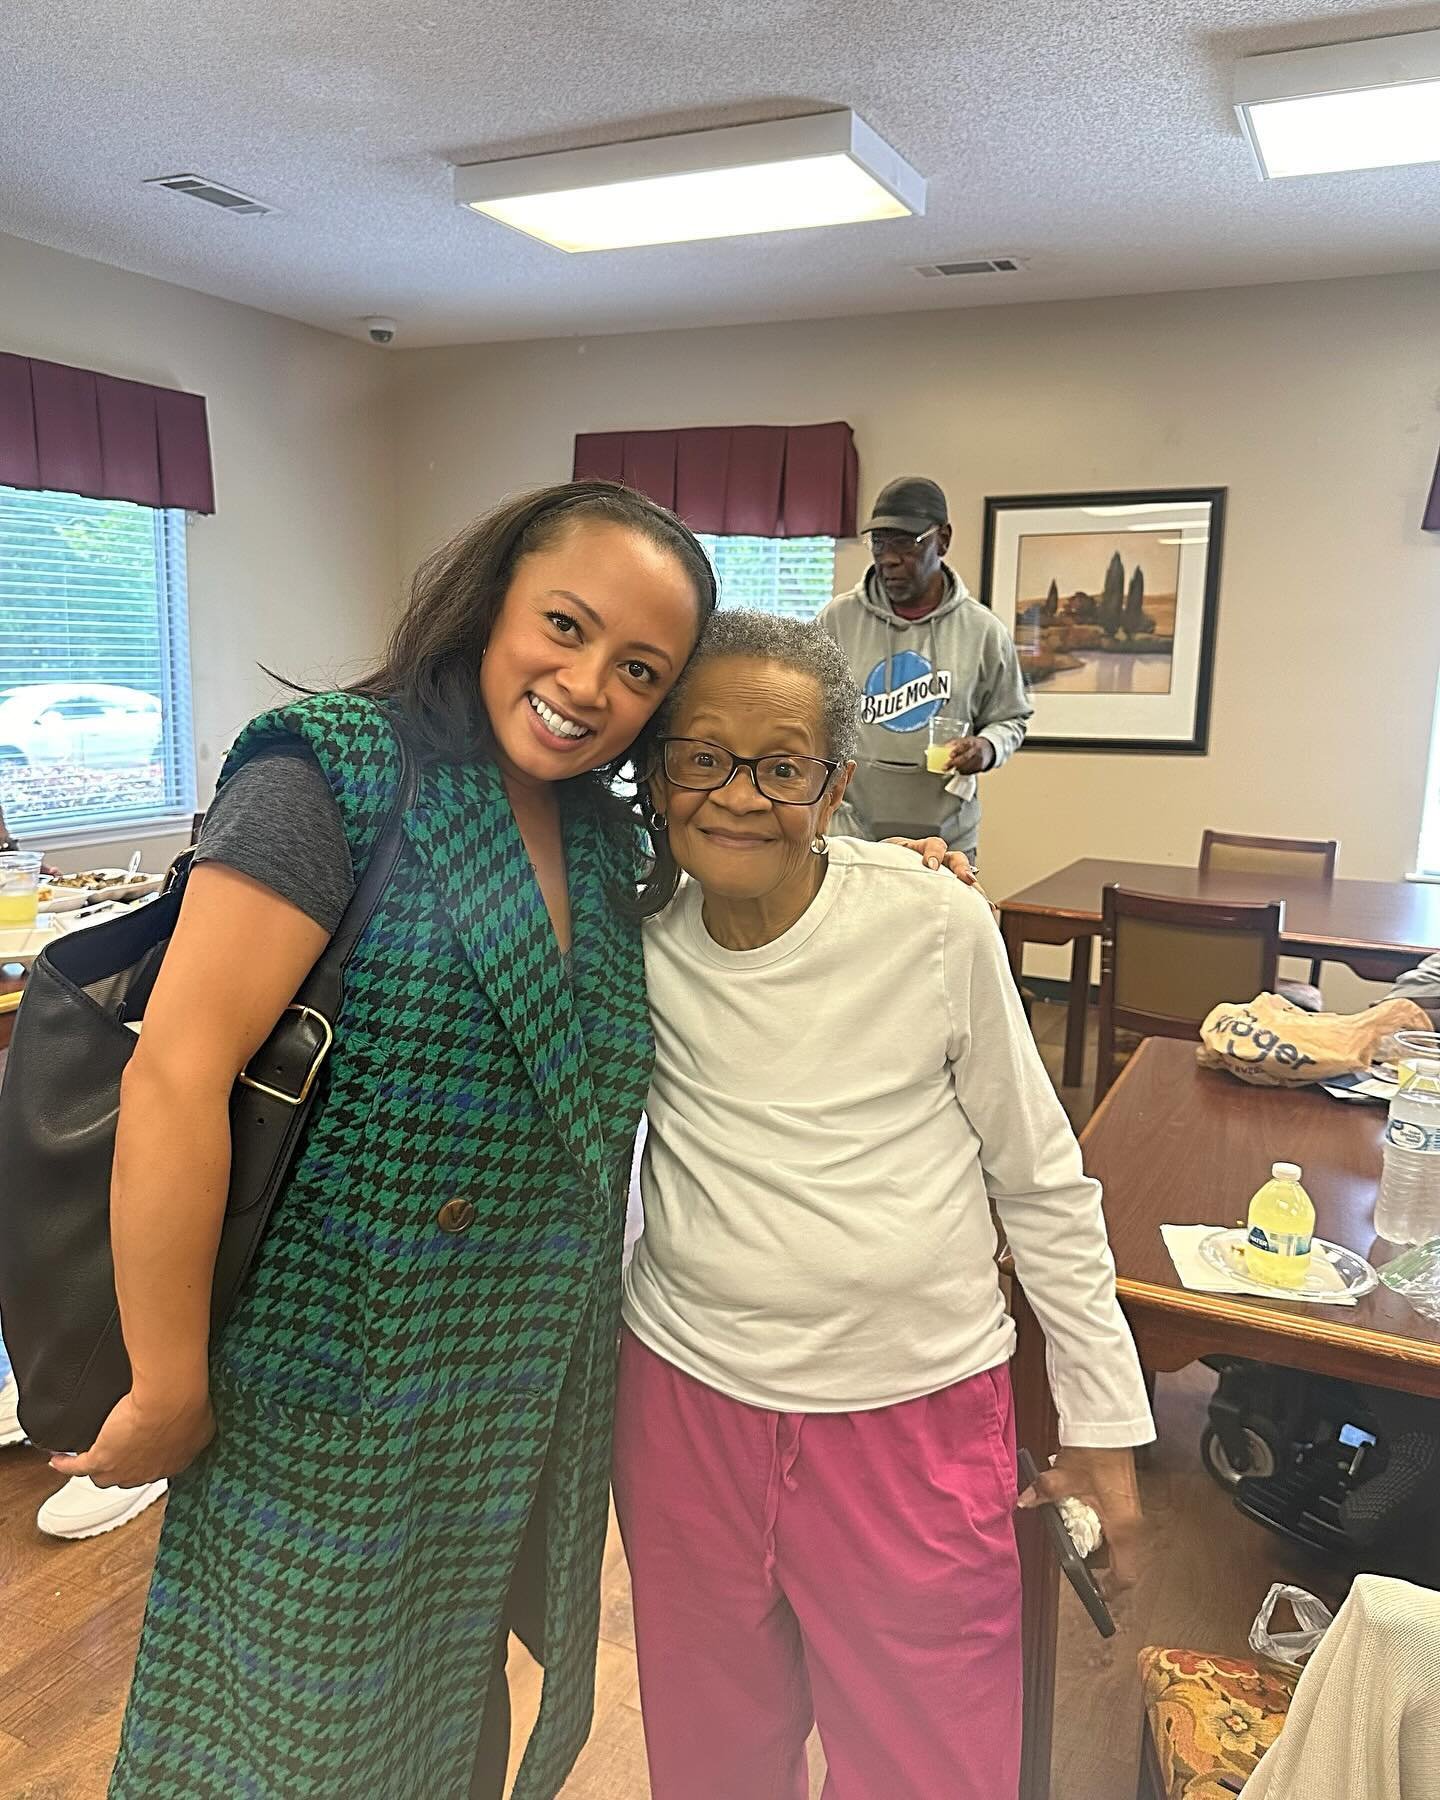 Spent a heartwarming time at the senior center connecting with our beloved residents. As a candidate for State Court Judge in DeKalb County, I believe in justice for all generations. 

Let&rsquo;s stand together for a fair and inclusive future. Honor